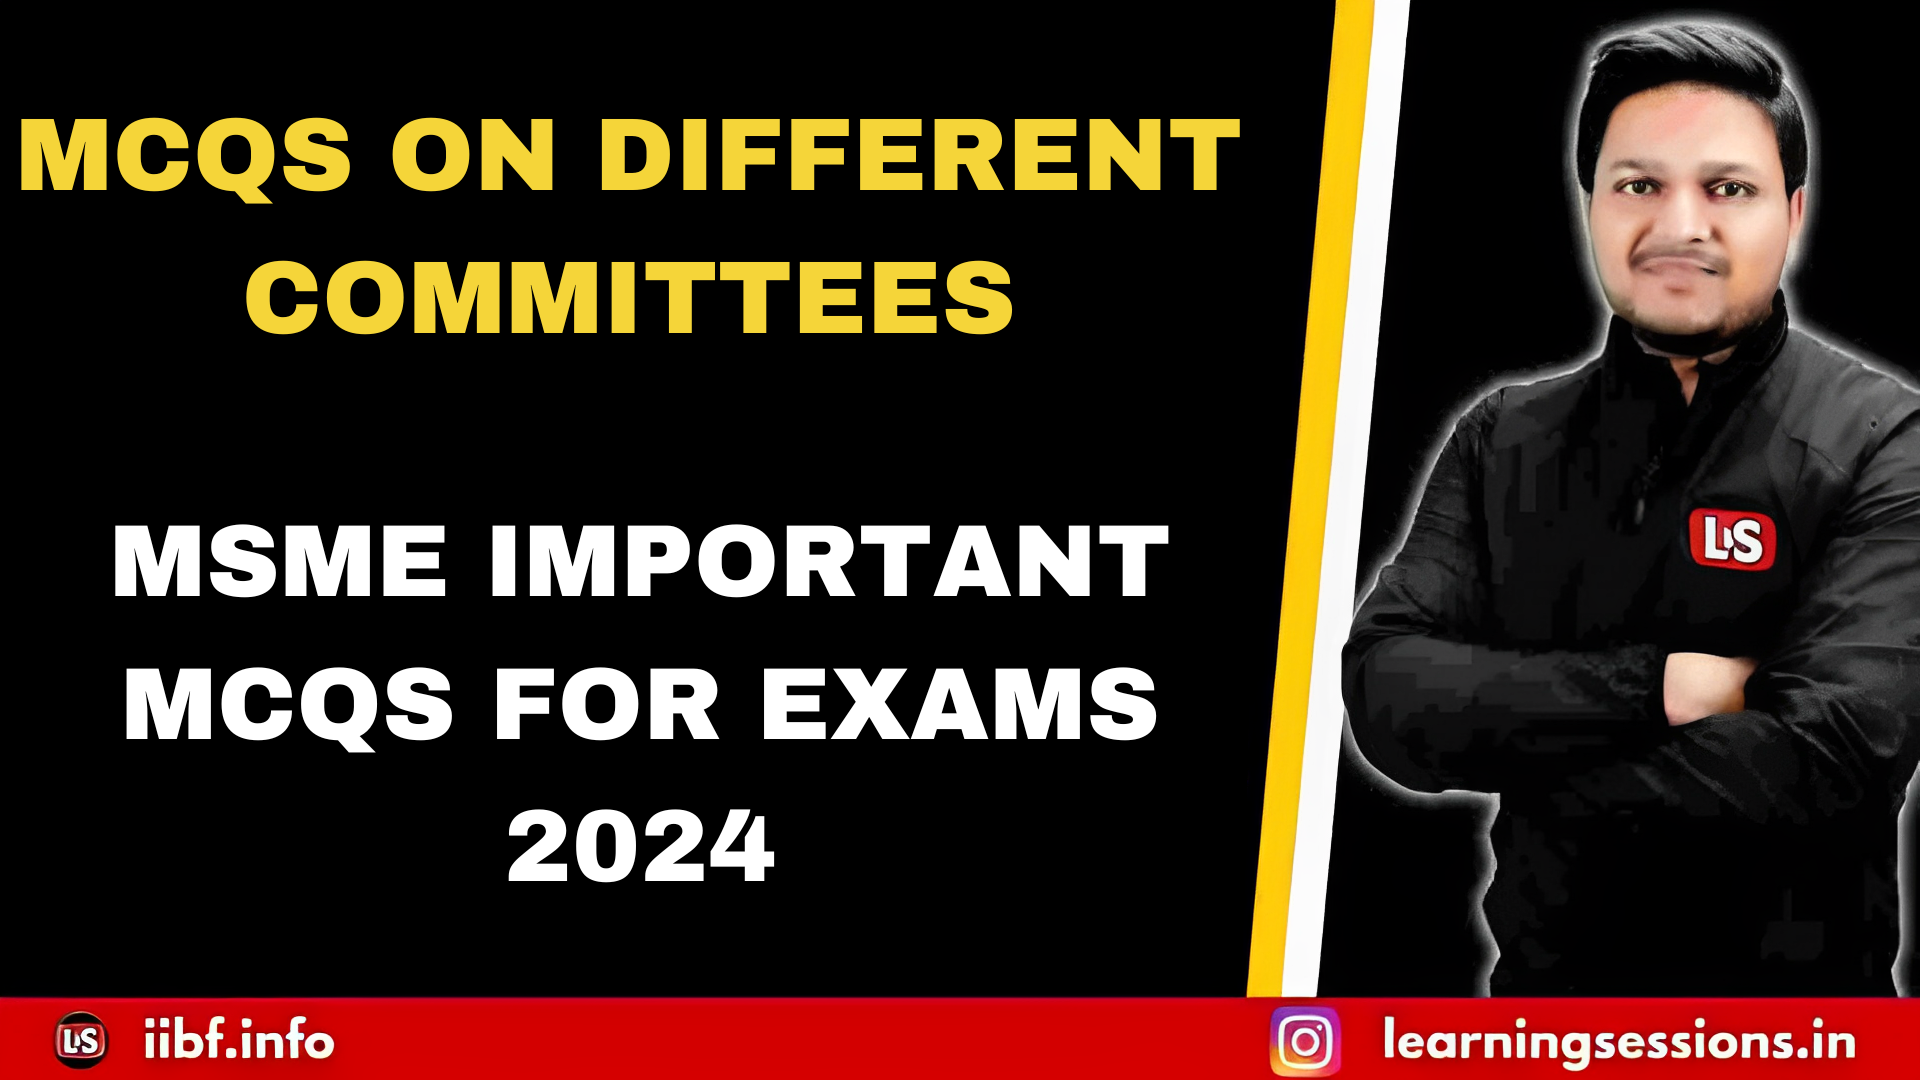 MSME IMPORTANT MCQS FOR EXAMS 2024